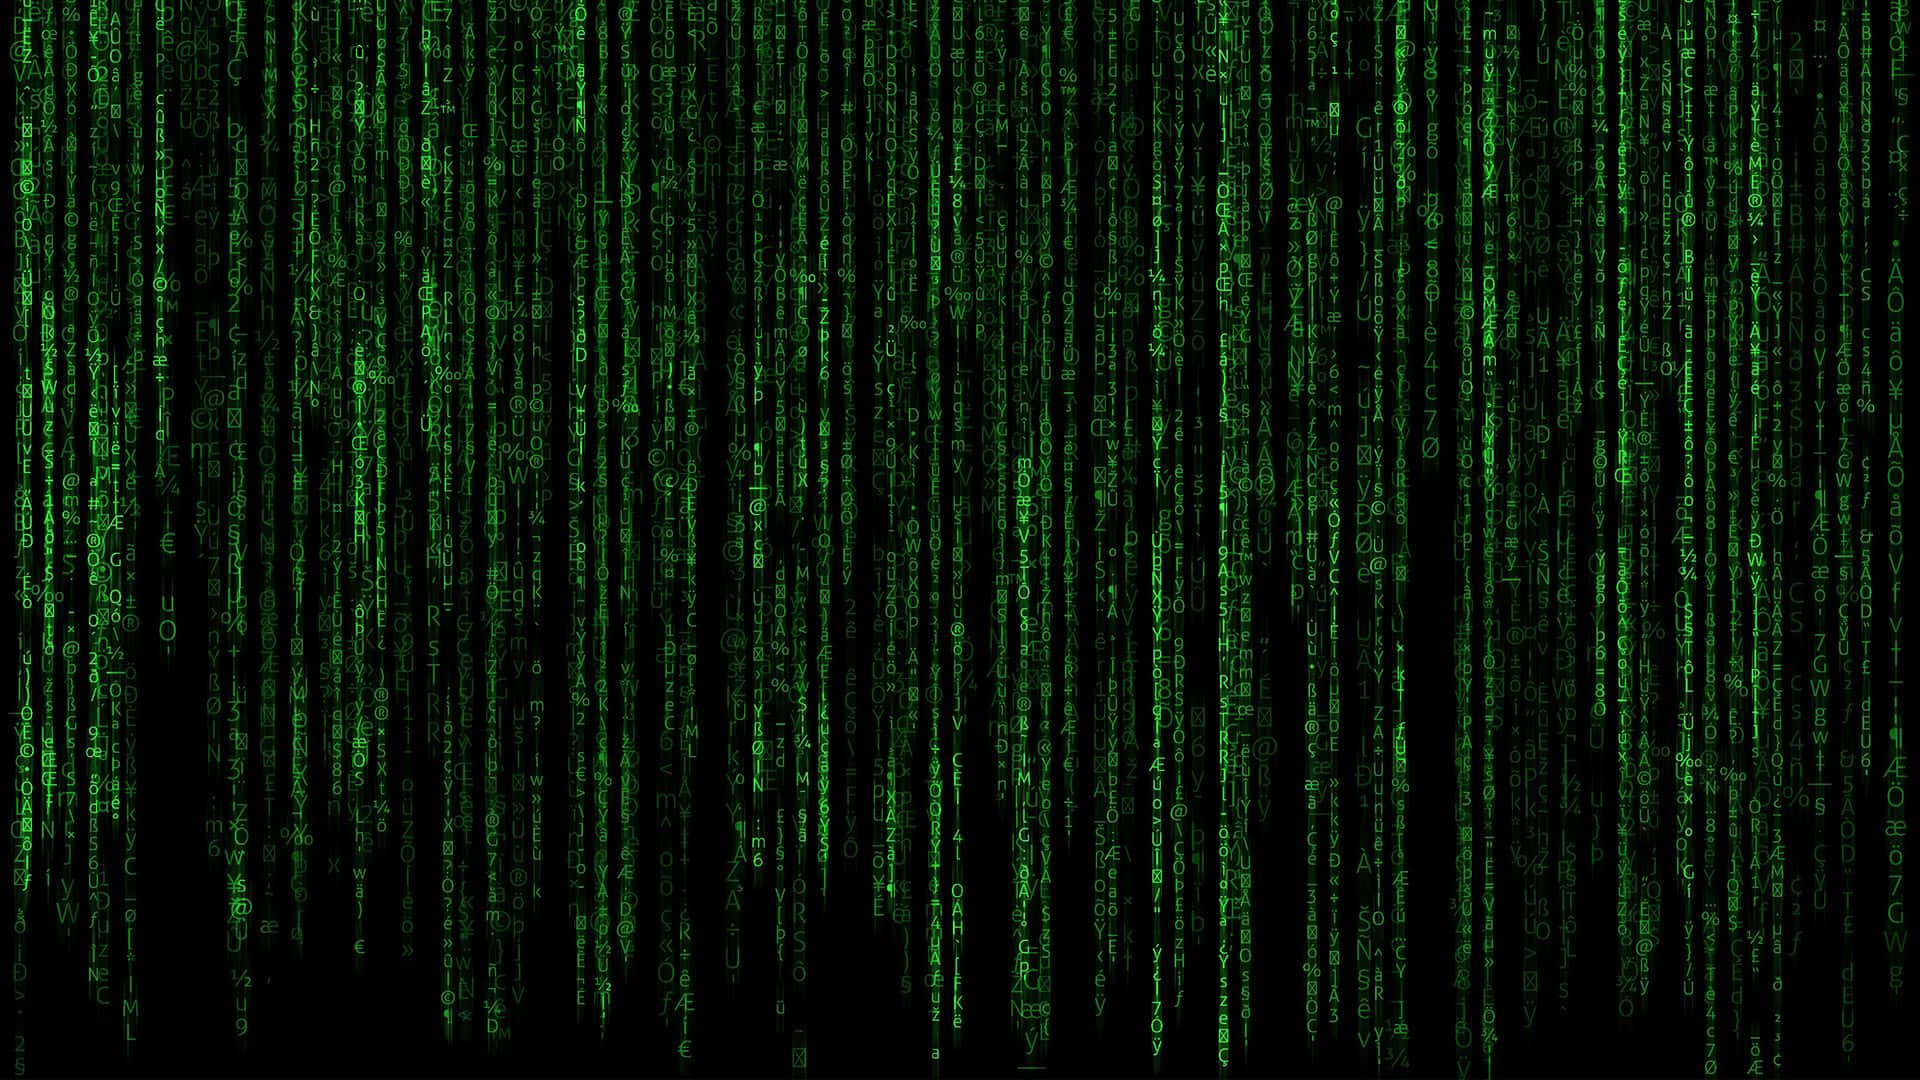 "Exploring the Endless Possibilities of the Matrix"